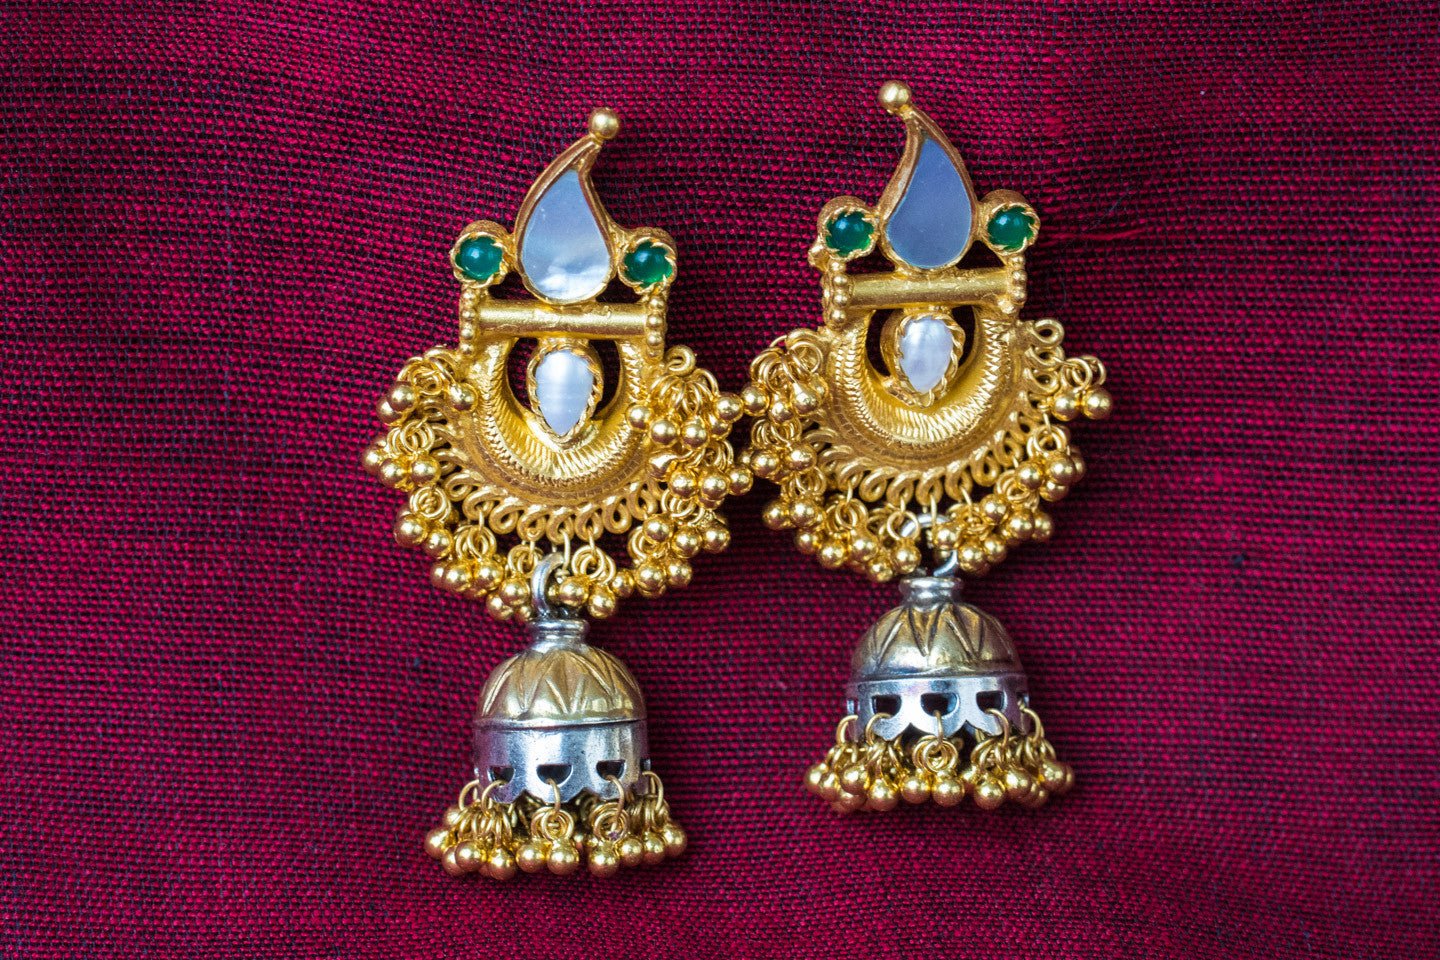 20a444-silver-gold-plated-amrapali-earrings-pearl-stone-two-tone-jhumka-alternate-view-2